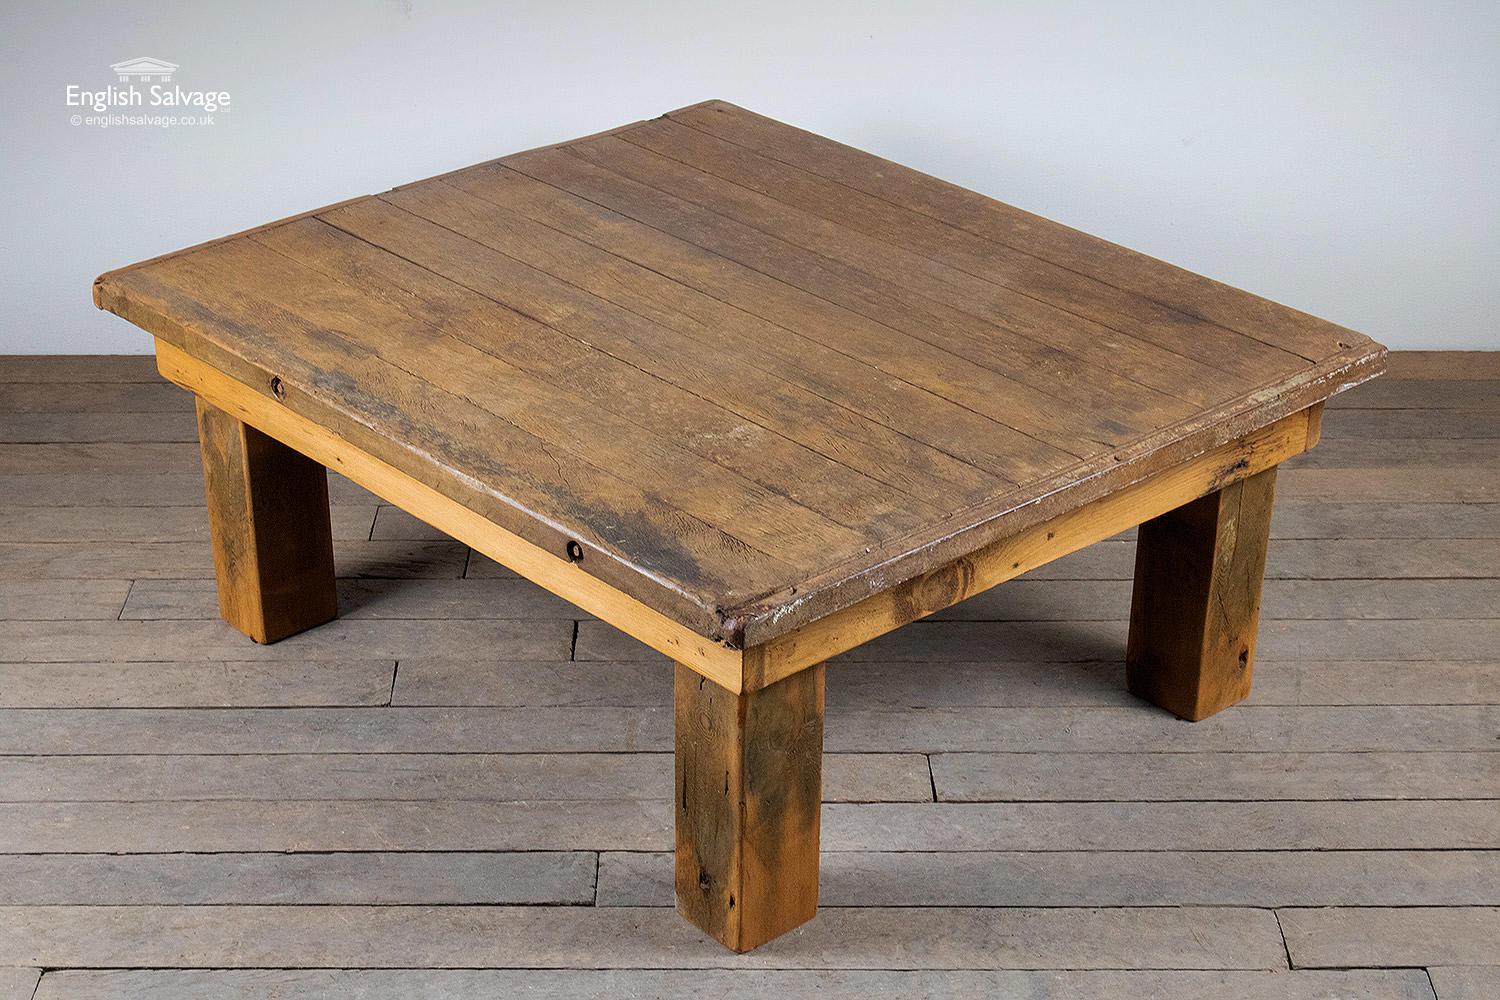 Chunky and substantial solid wood coffee table. Made from reclaimed wood, the top being a salvaged hardwood pottery board with iron bands to the edges. Quite rustic in appearance this heavy table has a lightly oiled / waxed finish which enhances the